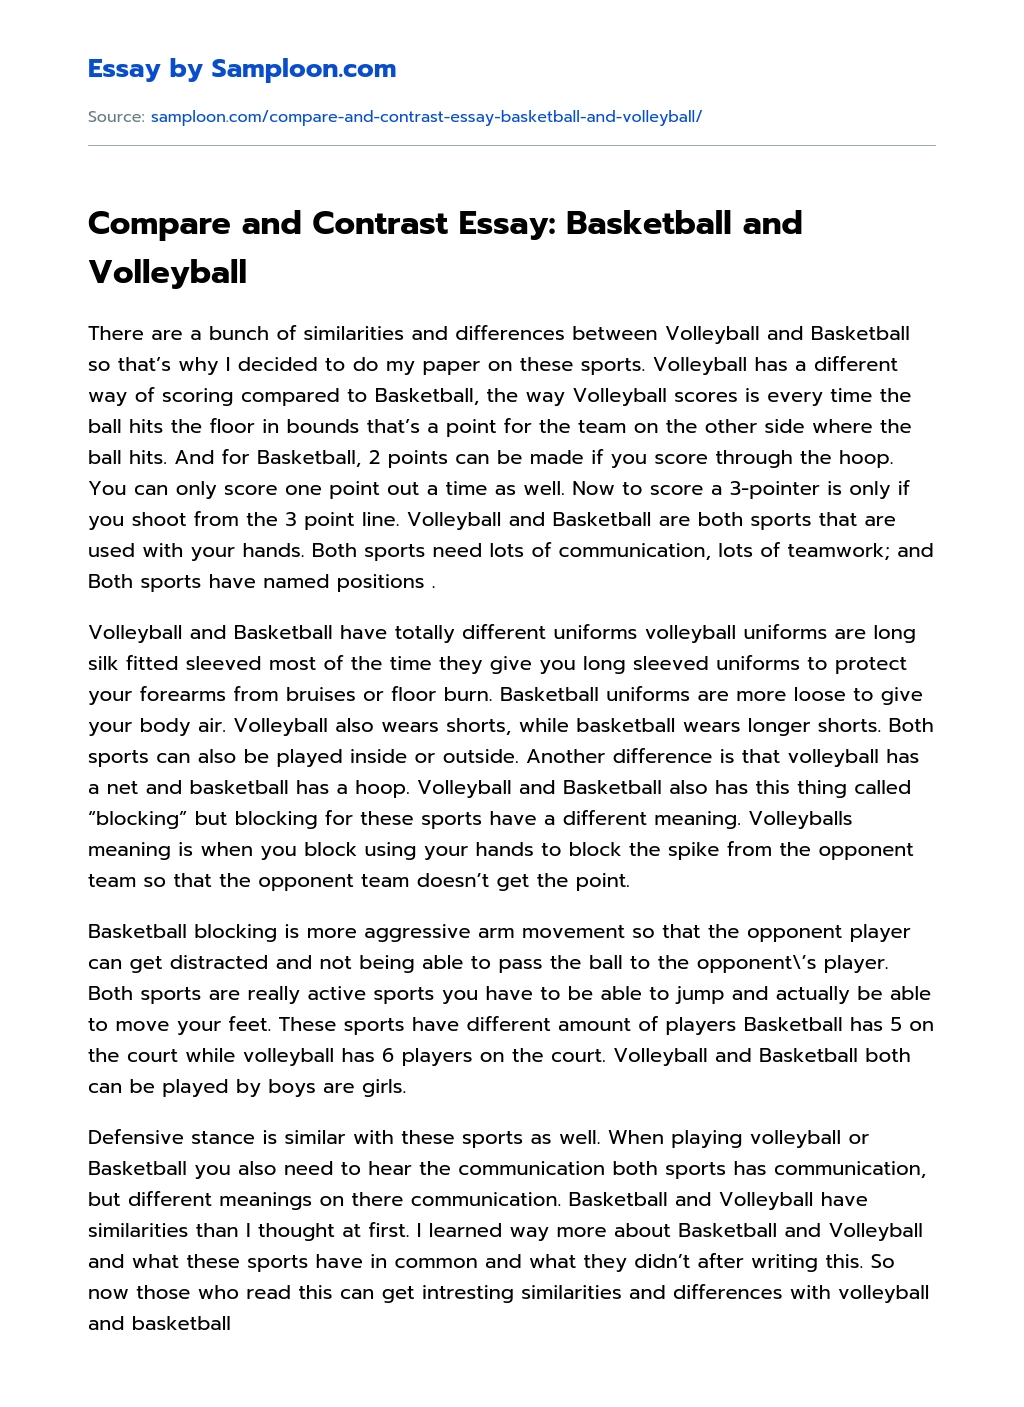 Compare and Contrast Essay: Basketball and Volleyball essay